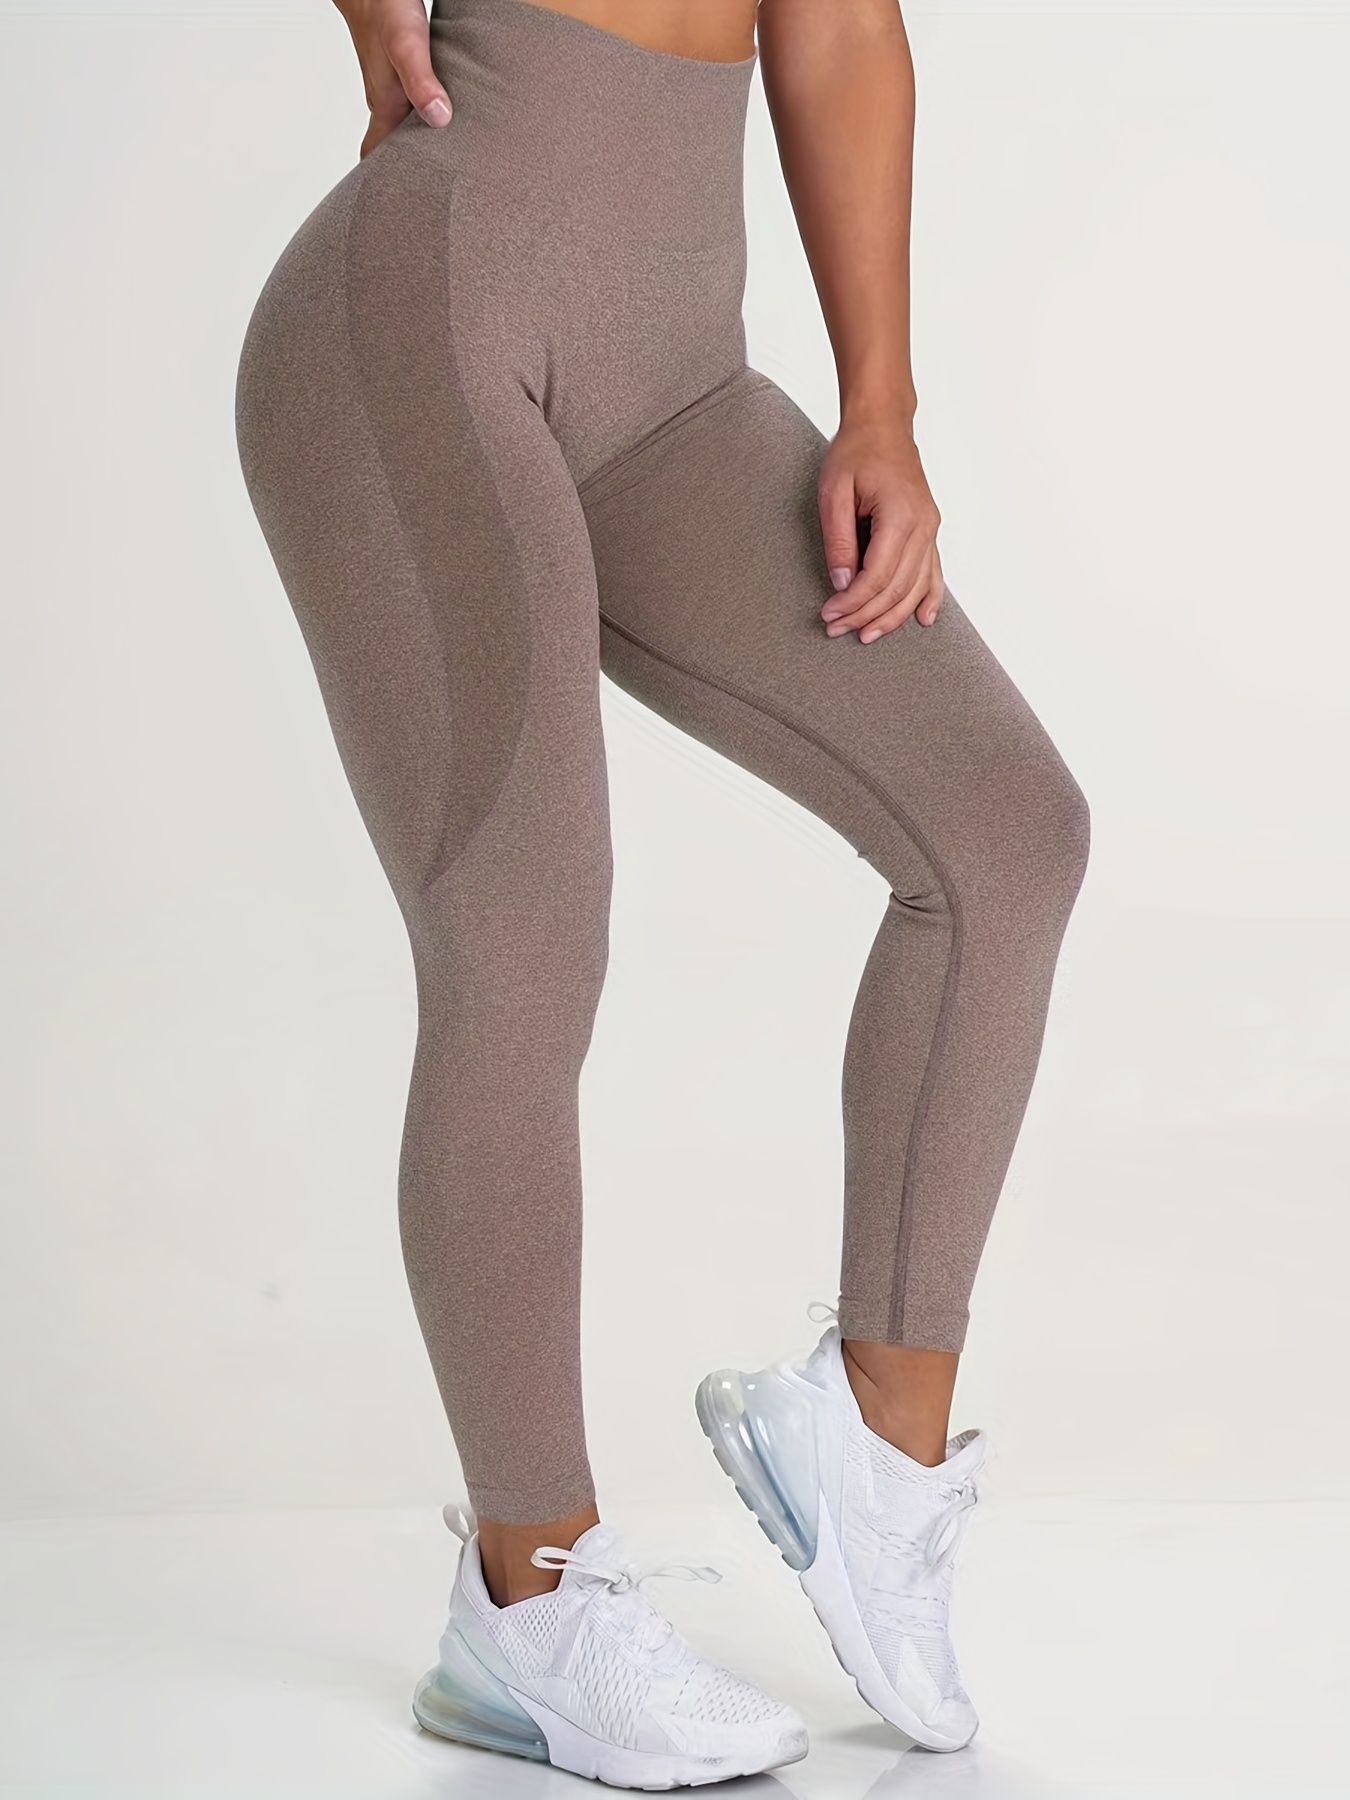 workout leggings seamless knitted moistureabsorbing sexy yoga pants running  sports fitness sexy yoga leggings gym clothes women t5098933